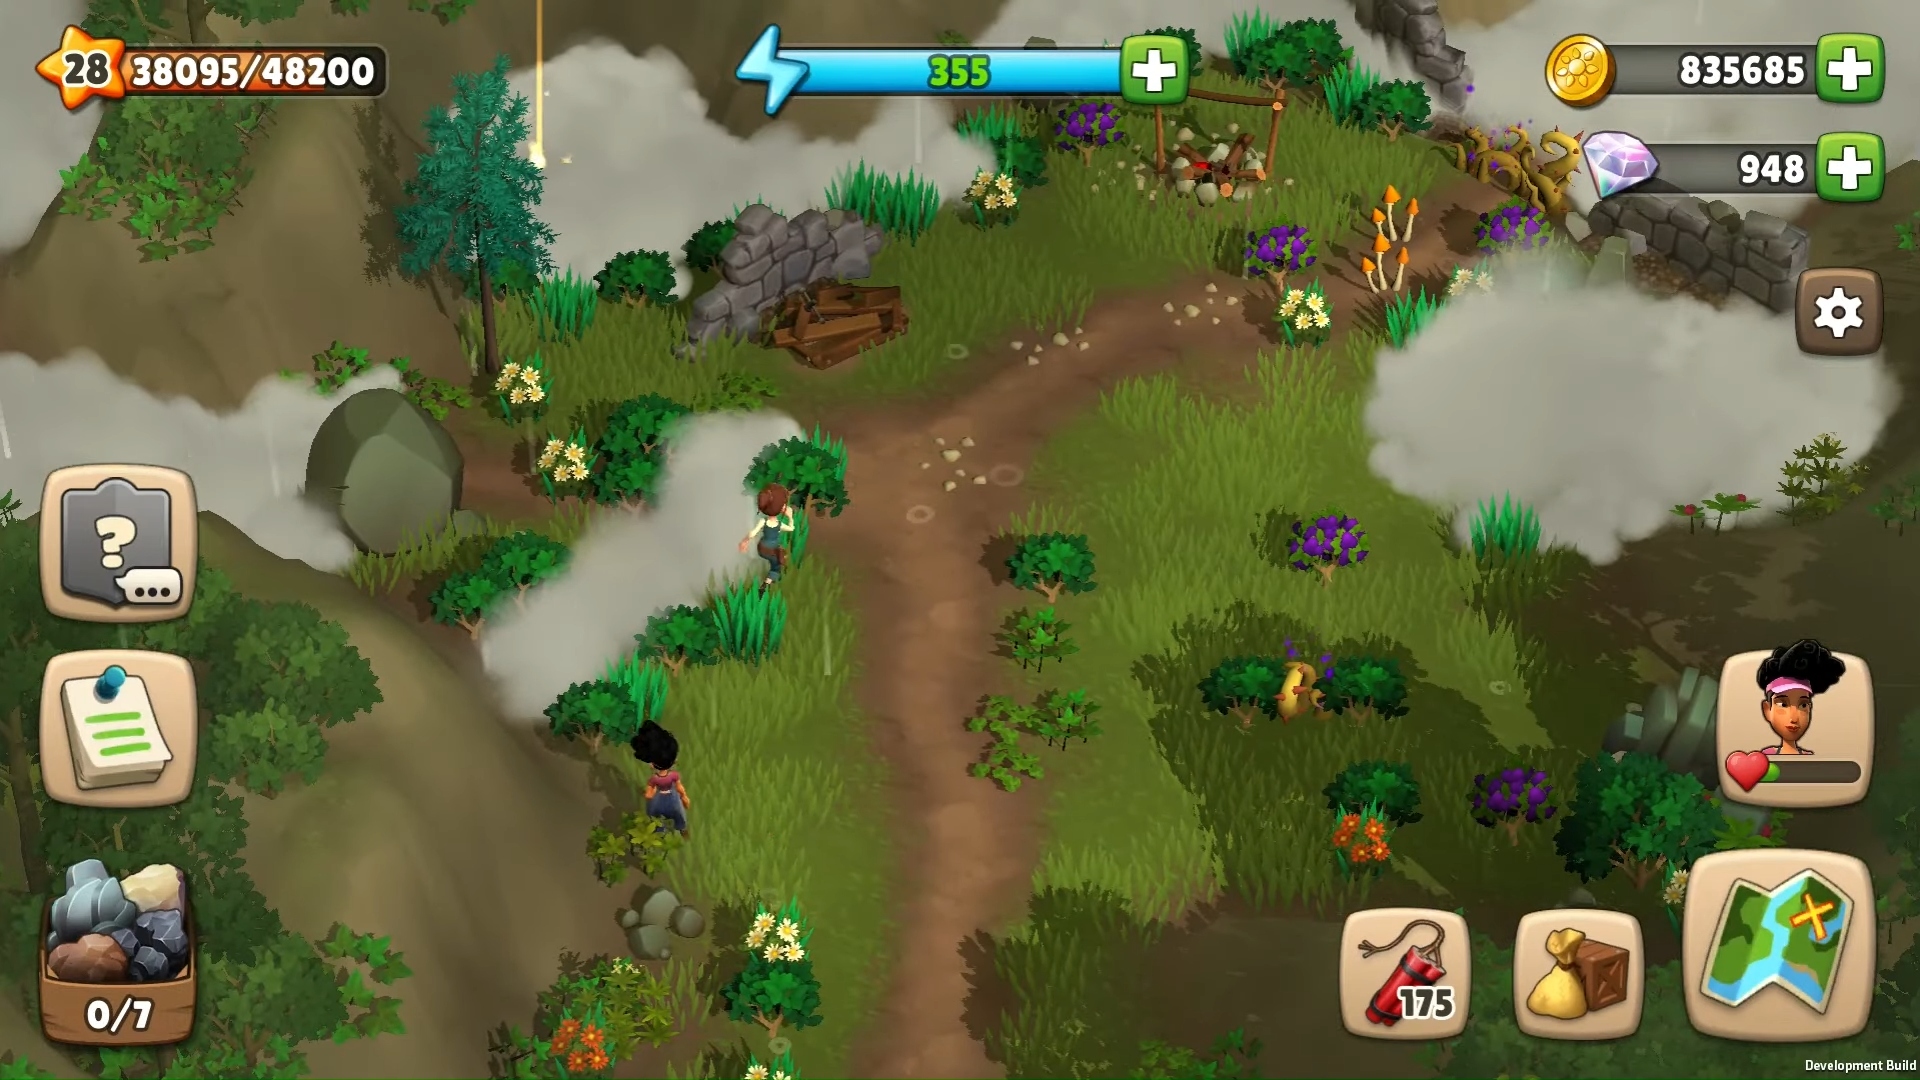 Addictive games - Sunrise Village. A screenshot shows a group of people toiling in the field,